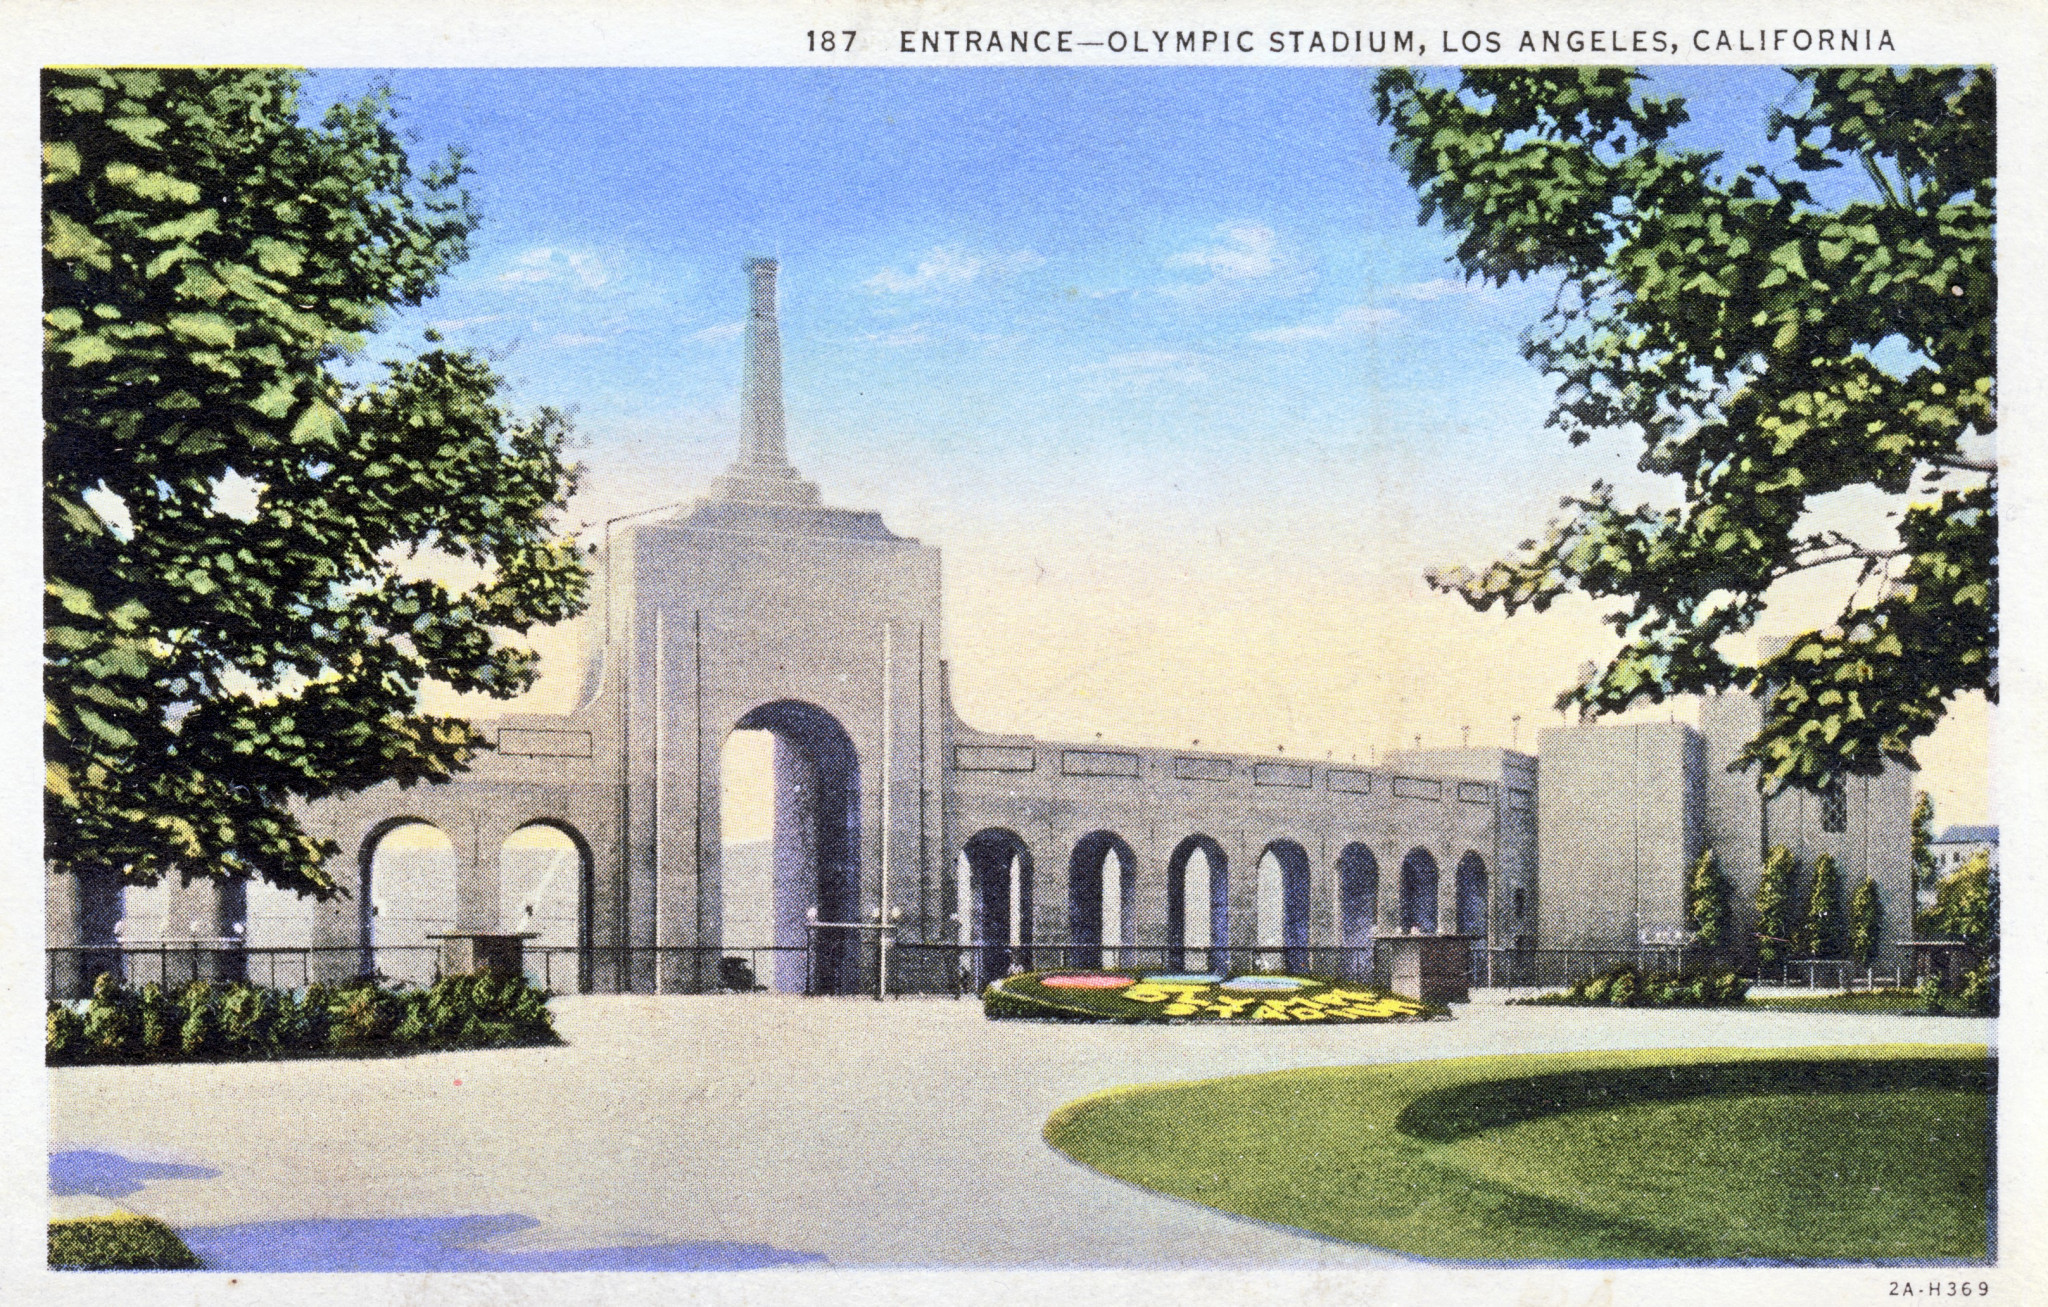 The Memorial Coliseum was completed shortly after the IOC selected Los Angeles as host city for the 1932 Olympics ©ITG